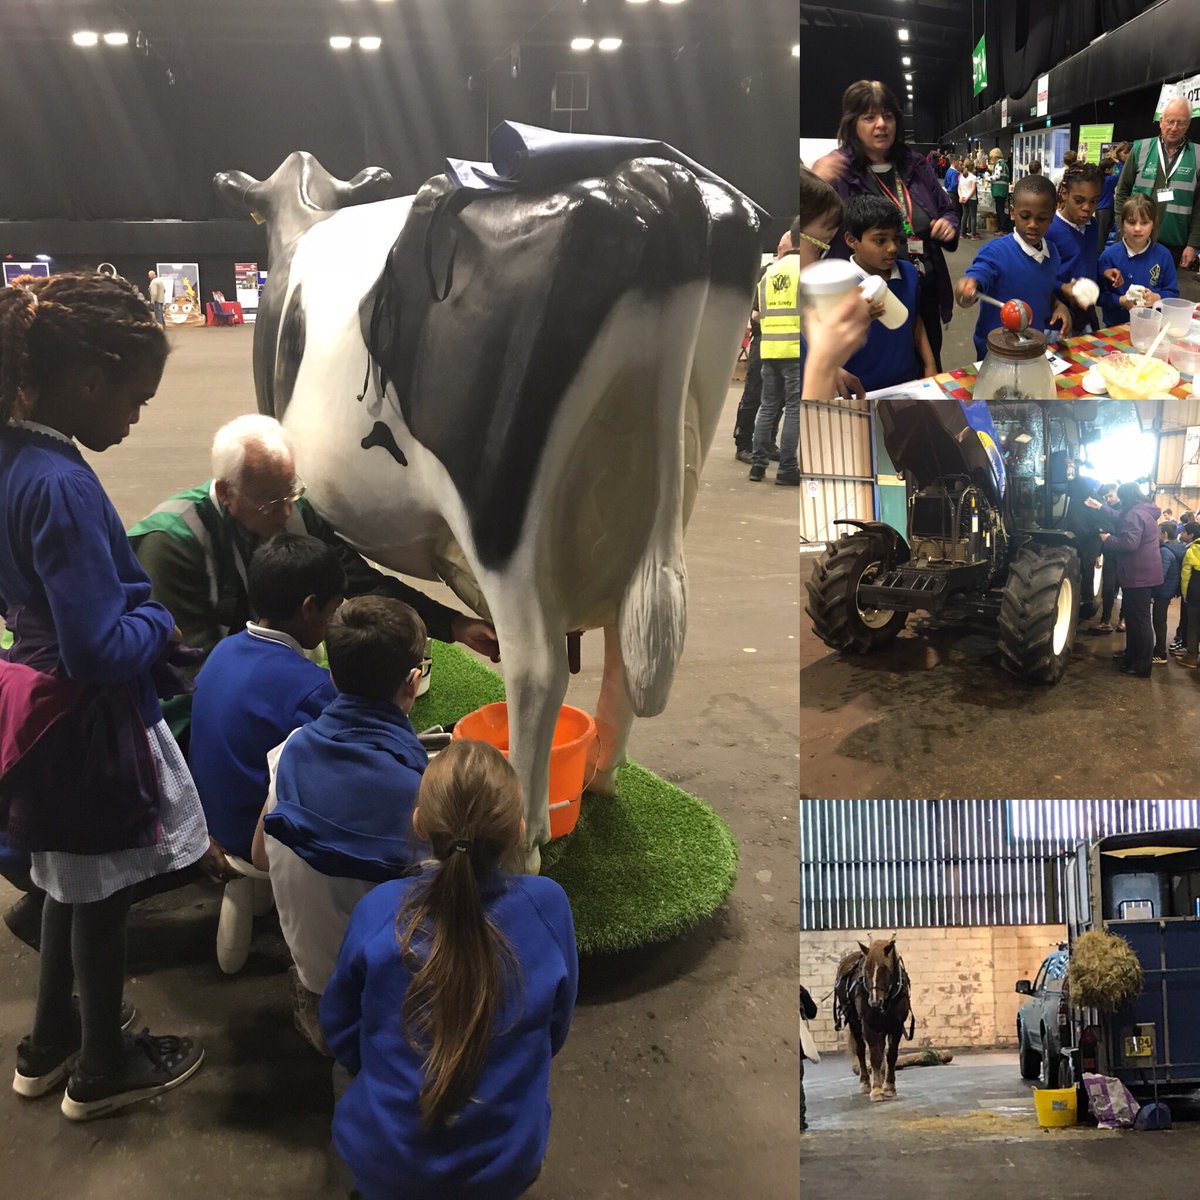 Great day helping out @TheRhet #foodandfarming event. Great to see city kids learn about our industry.